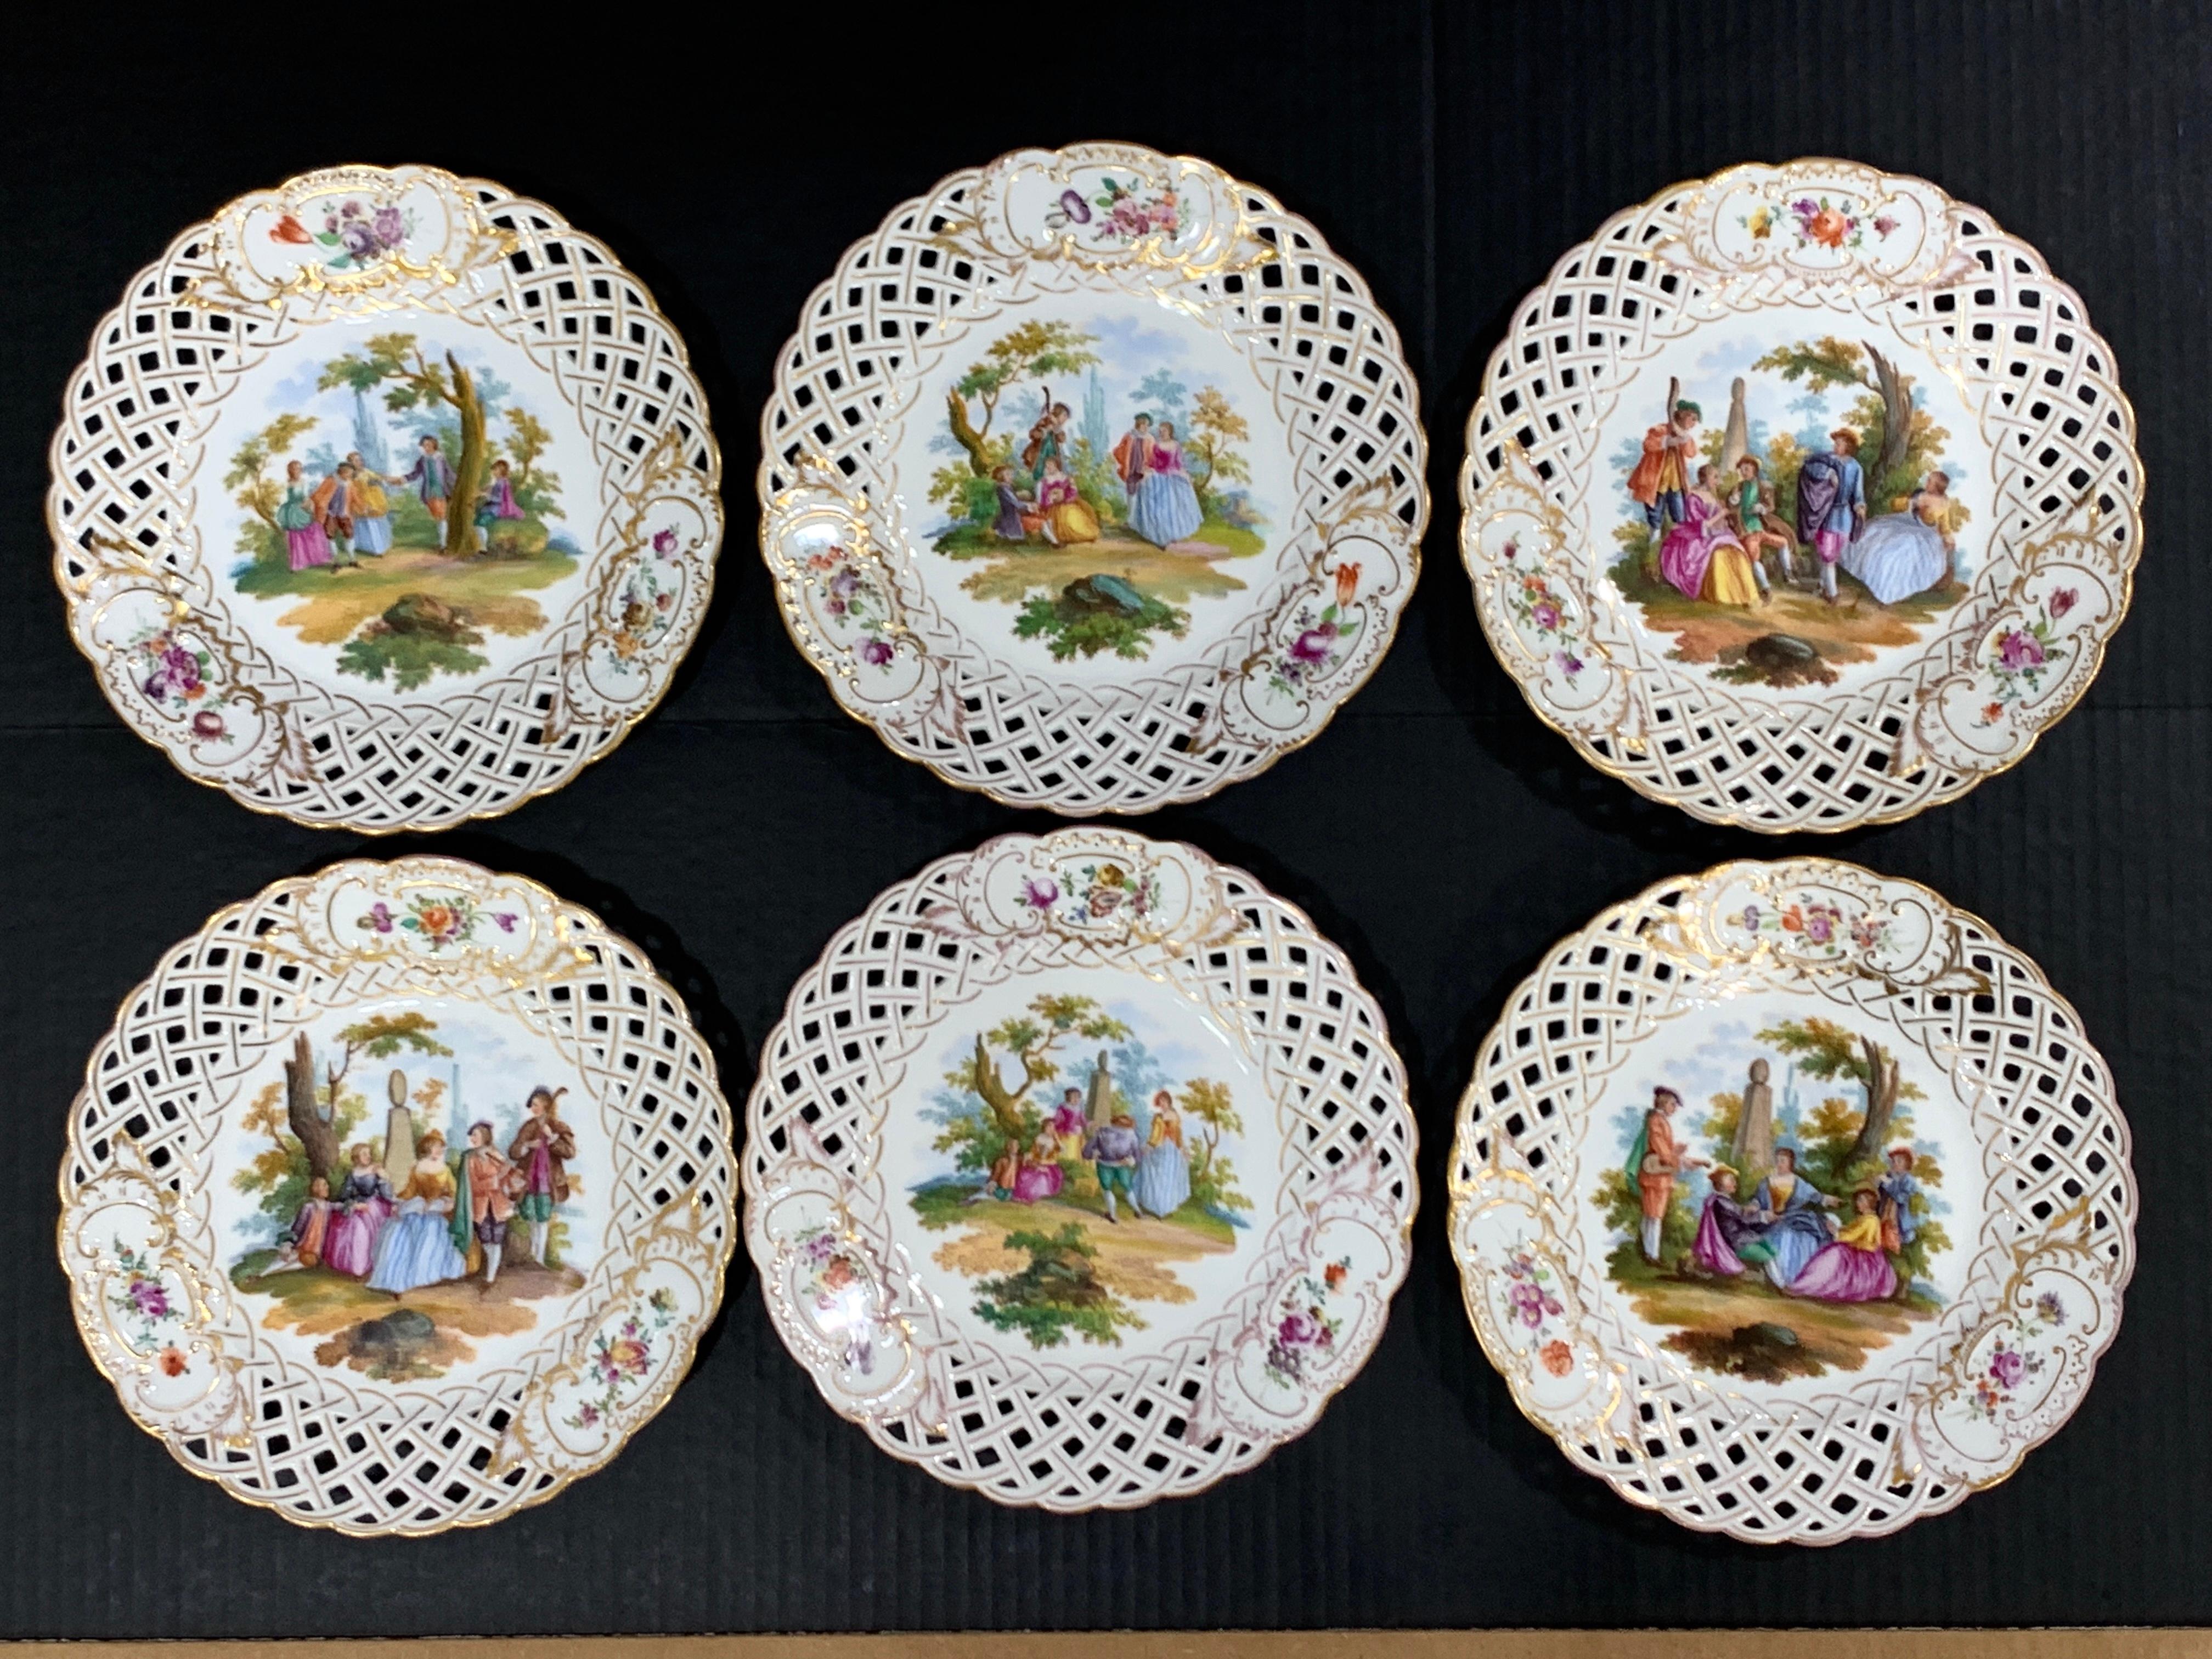 Dresden Reticulated Plates - 3 For Sale on 1stDibs